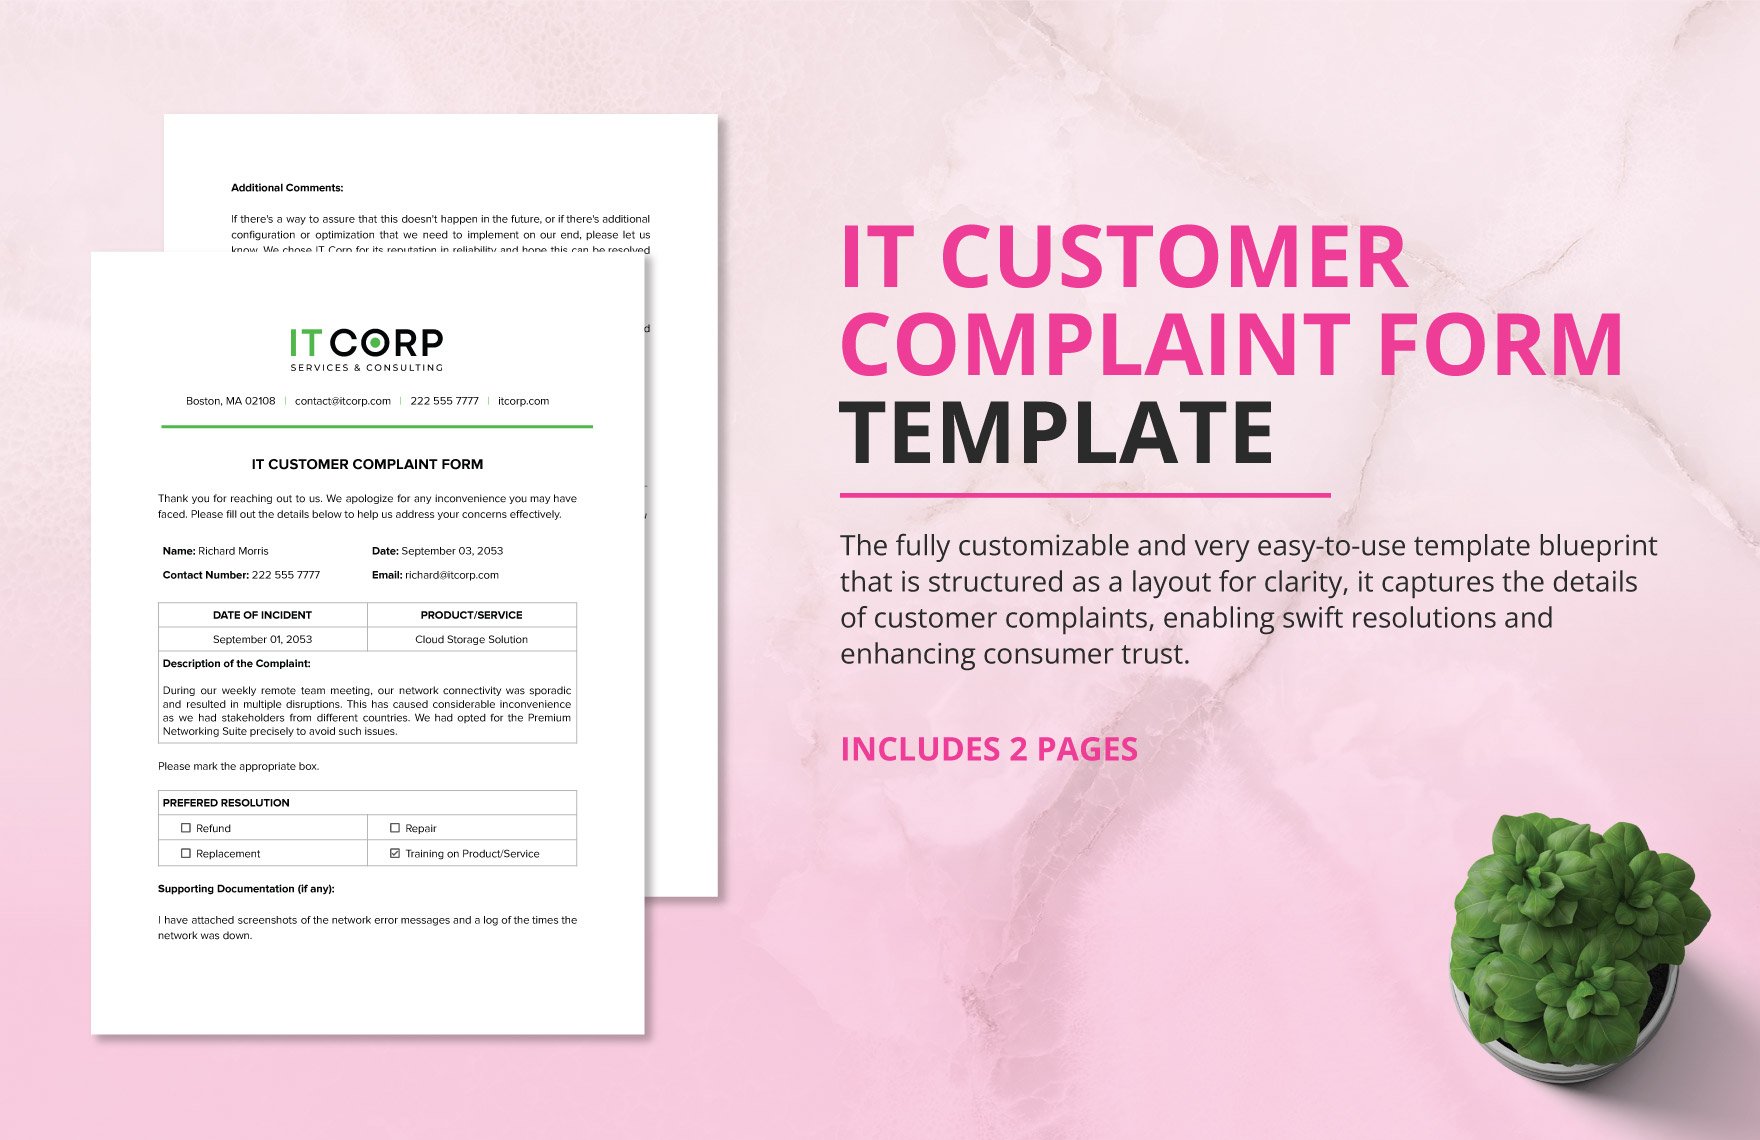 IT Customer Complaint Form Template in Word, Google Docs, PDF